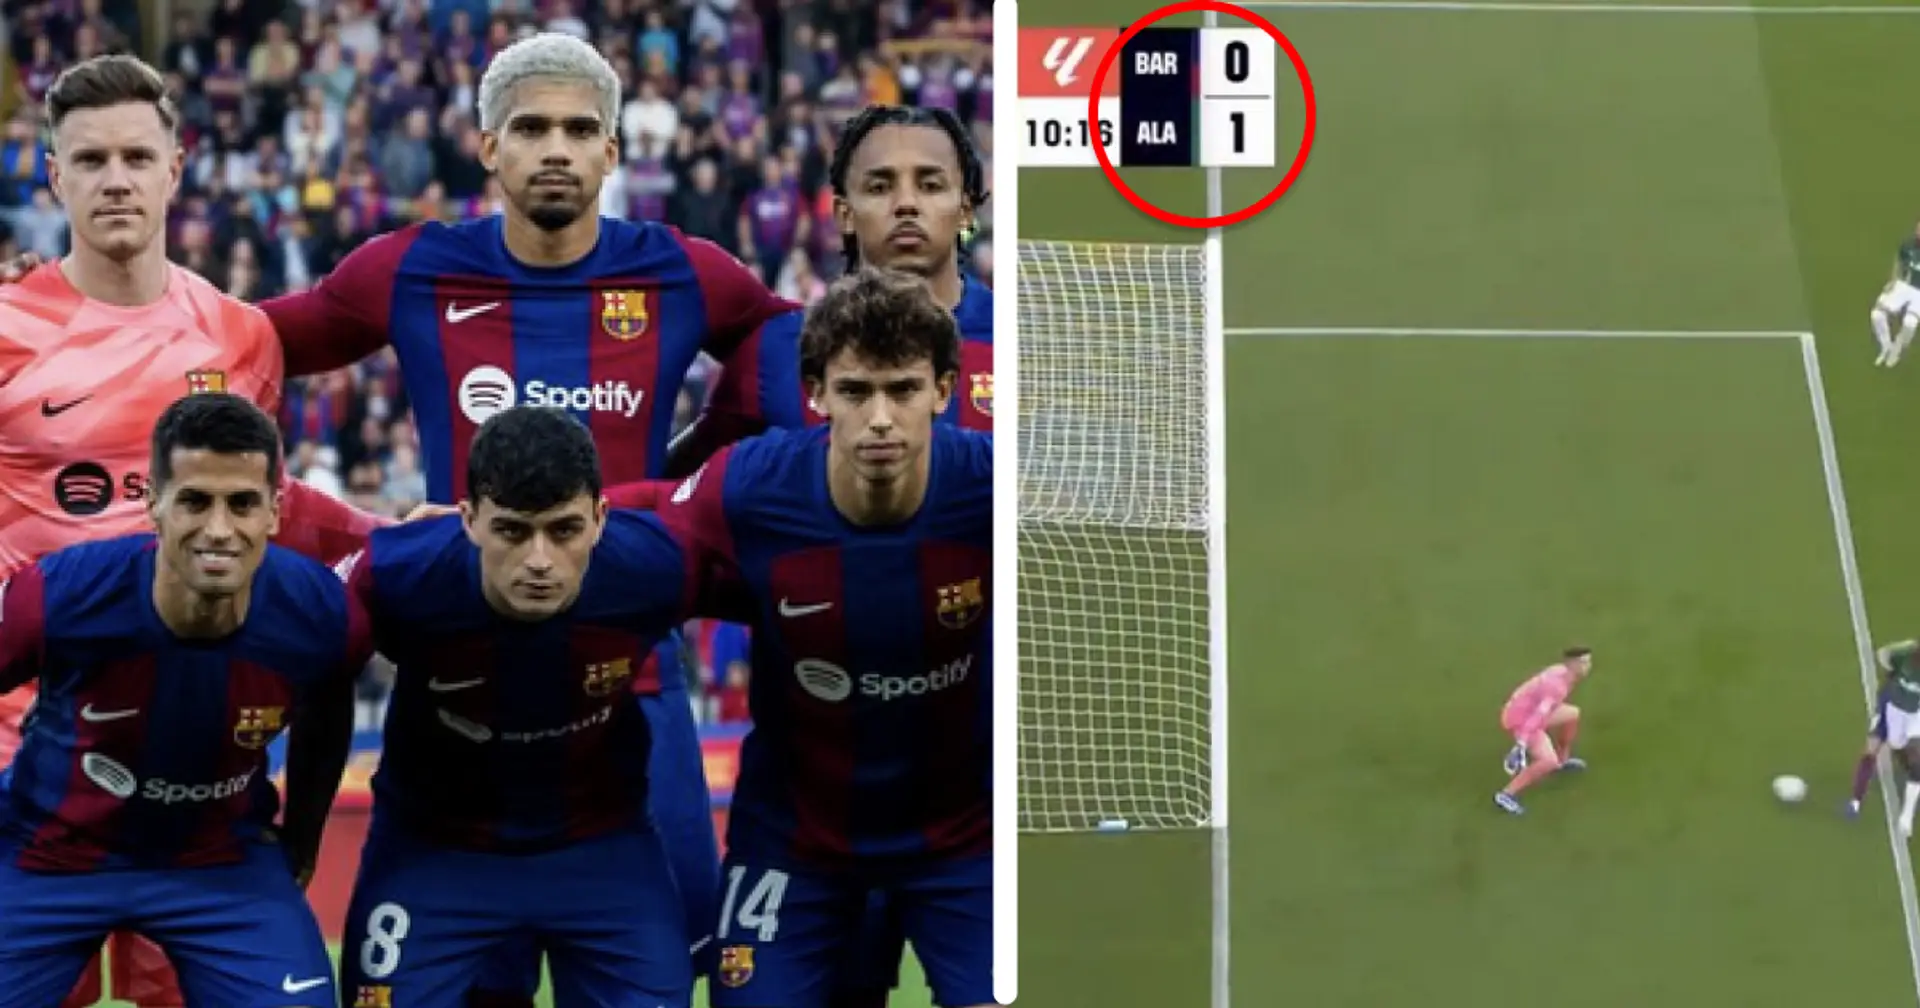 'We speak too much': One Barca player gave 'aggressive' half-time speech v Alaves